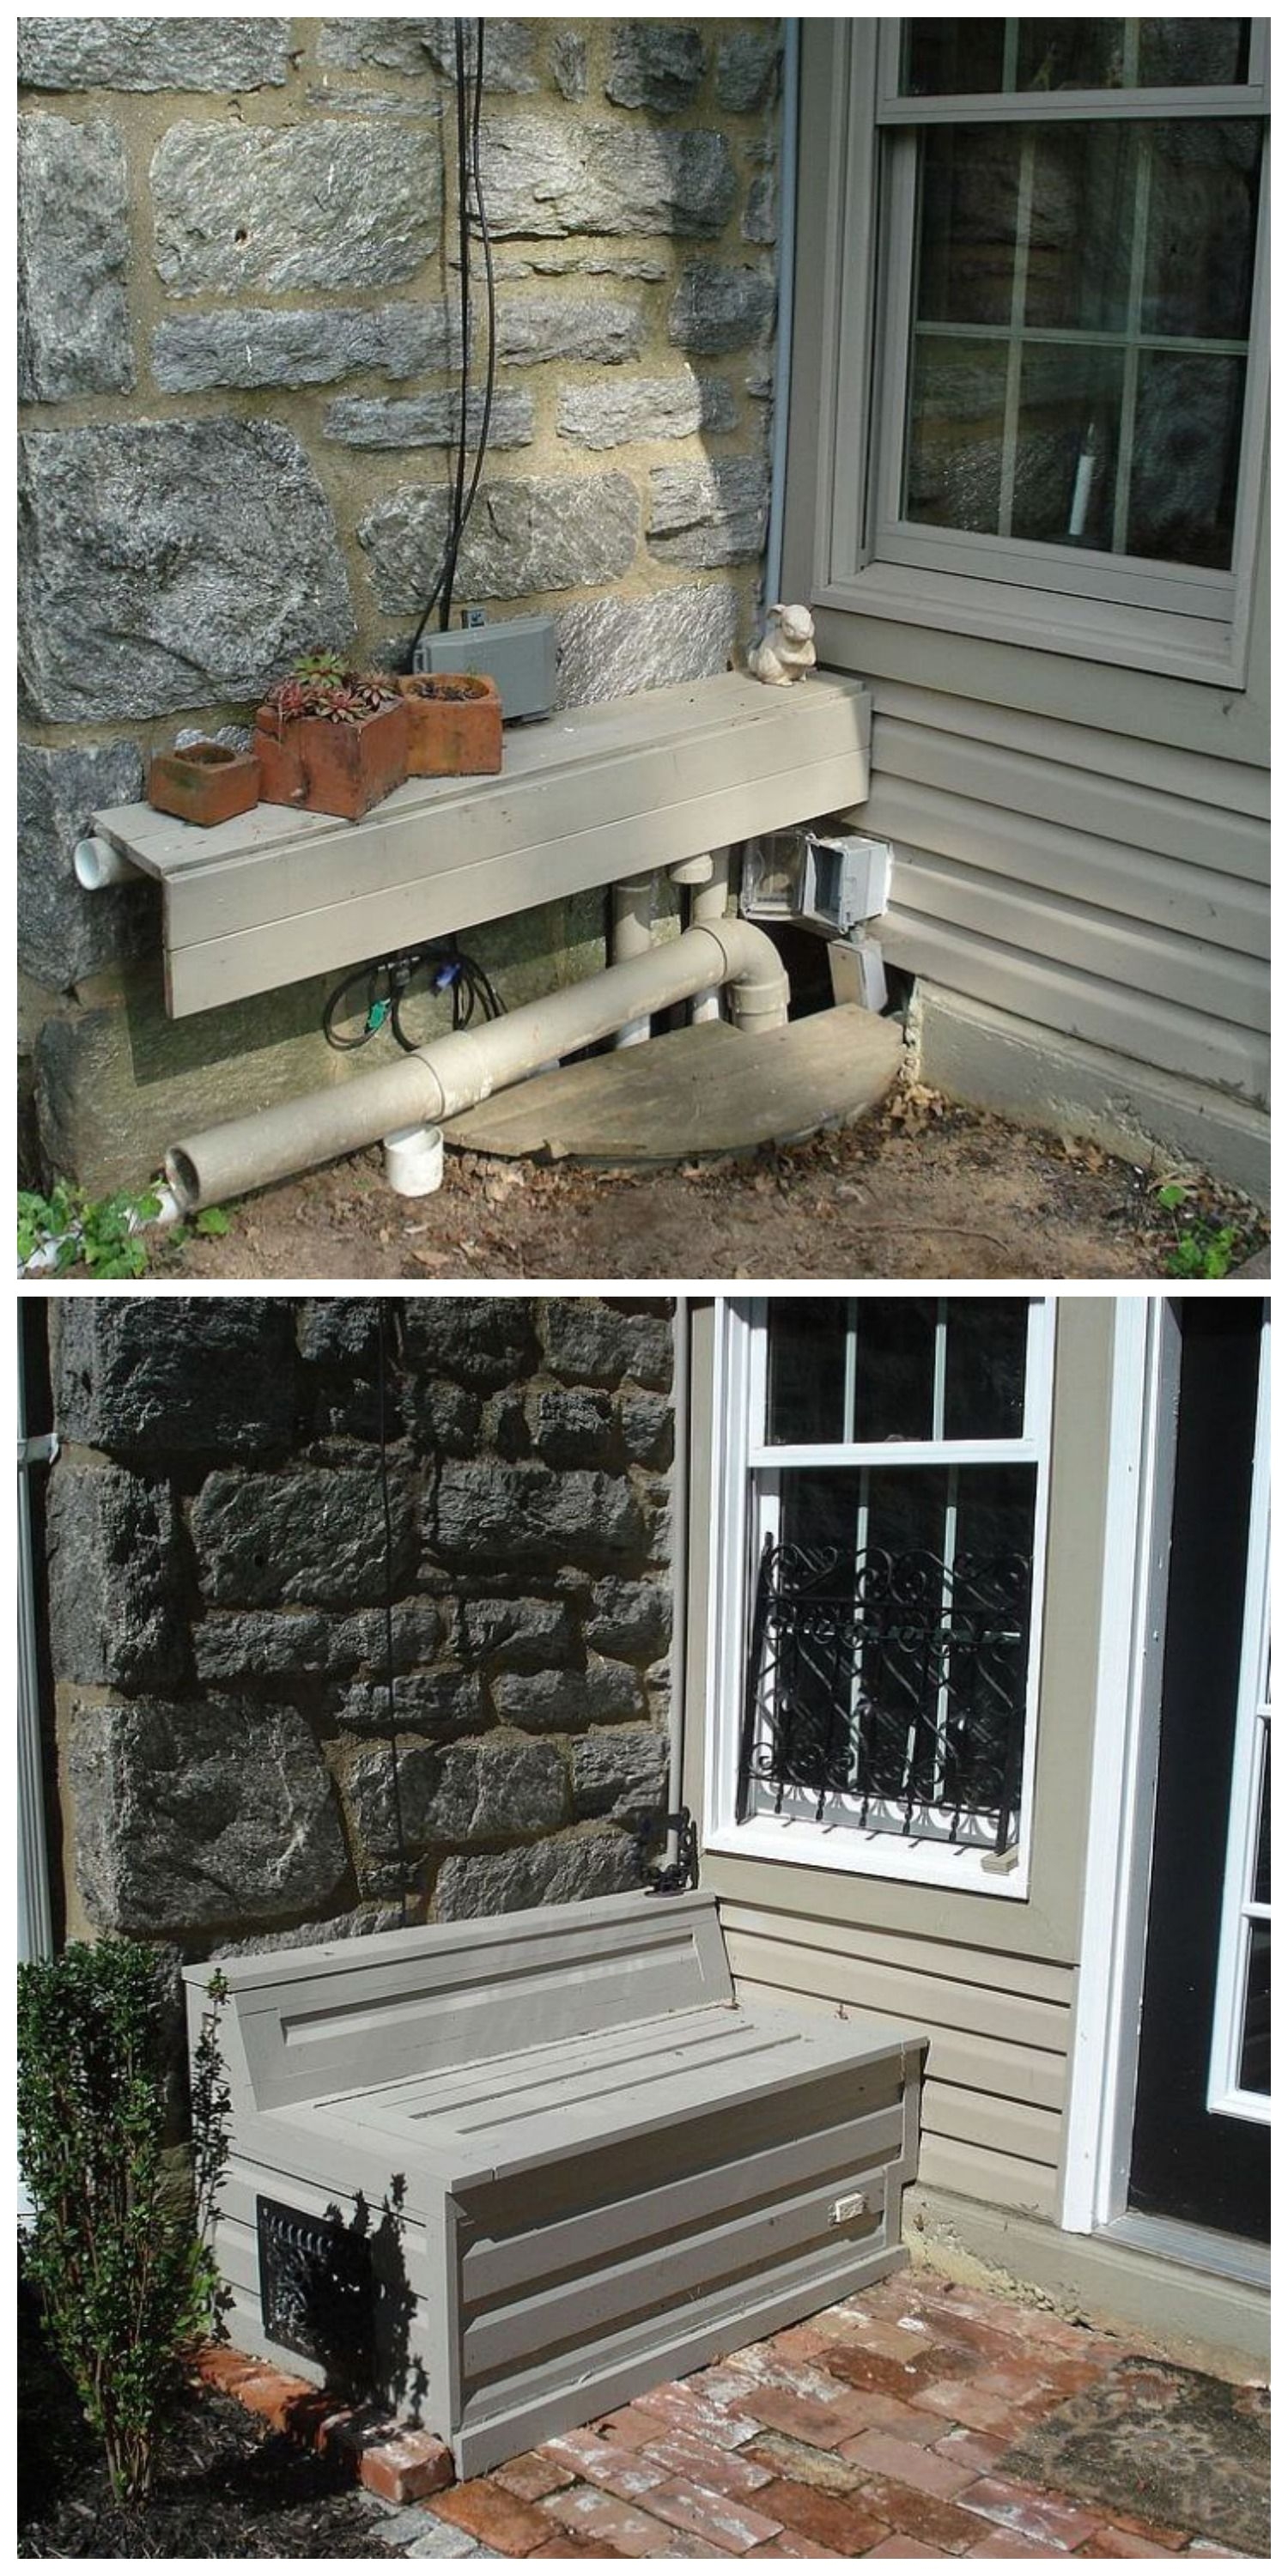 Decorative House Foundation Vents Way to Cover Ugly Pipes Wires Pinterest Clever Pipes and Bench